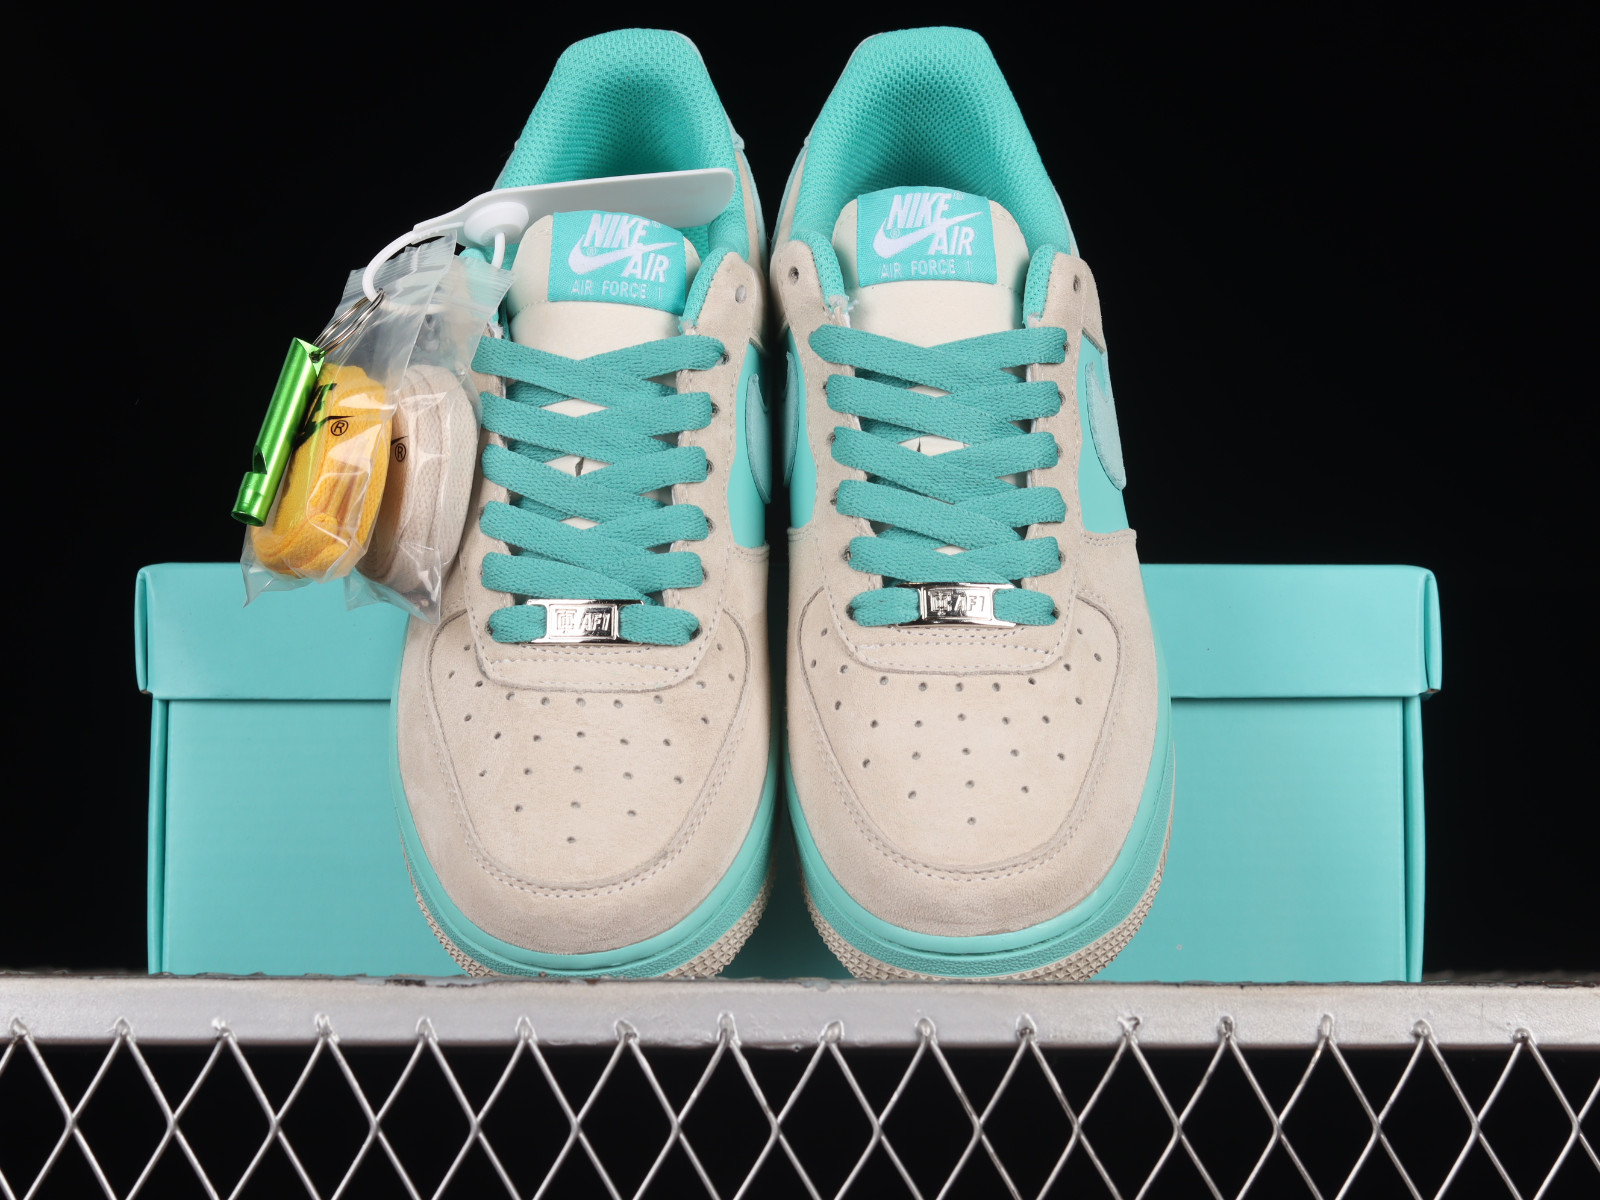 Tiffany Nike Air Force 1 Friends and Family Info